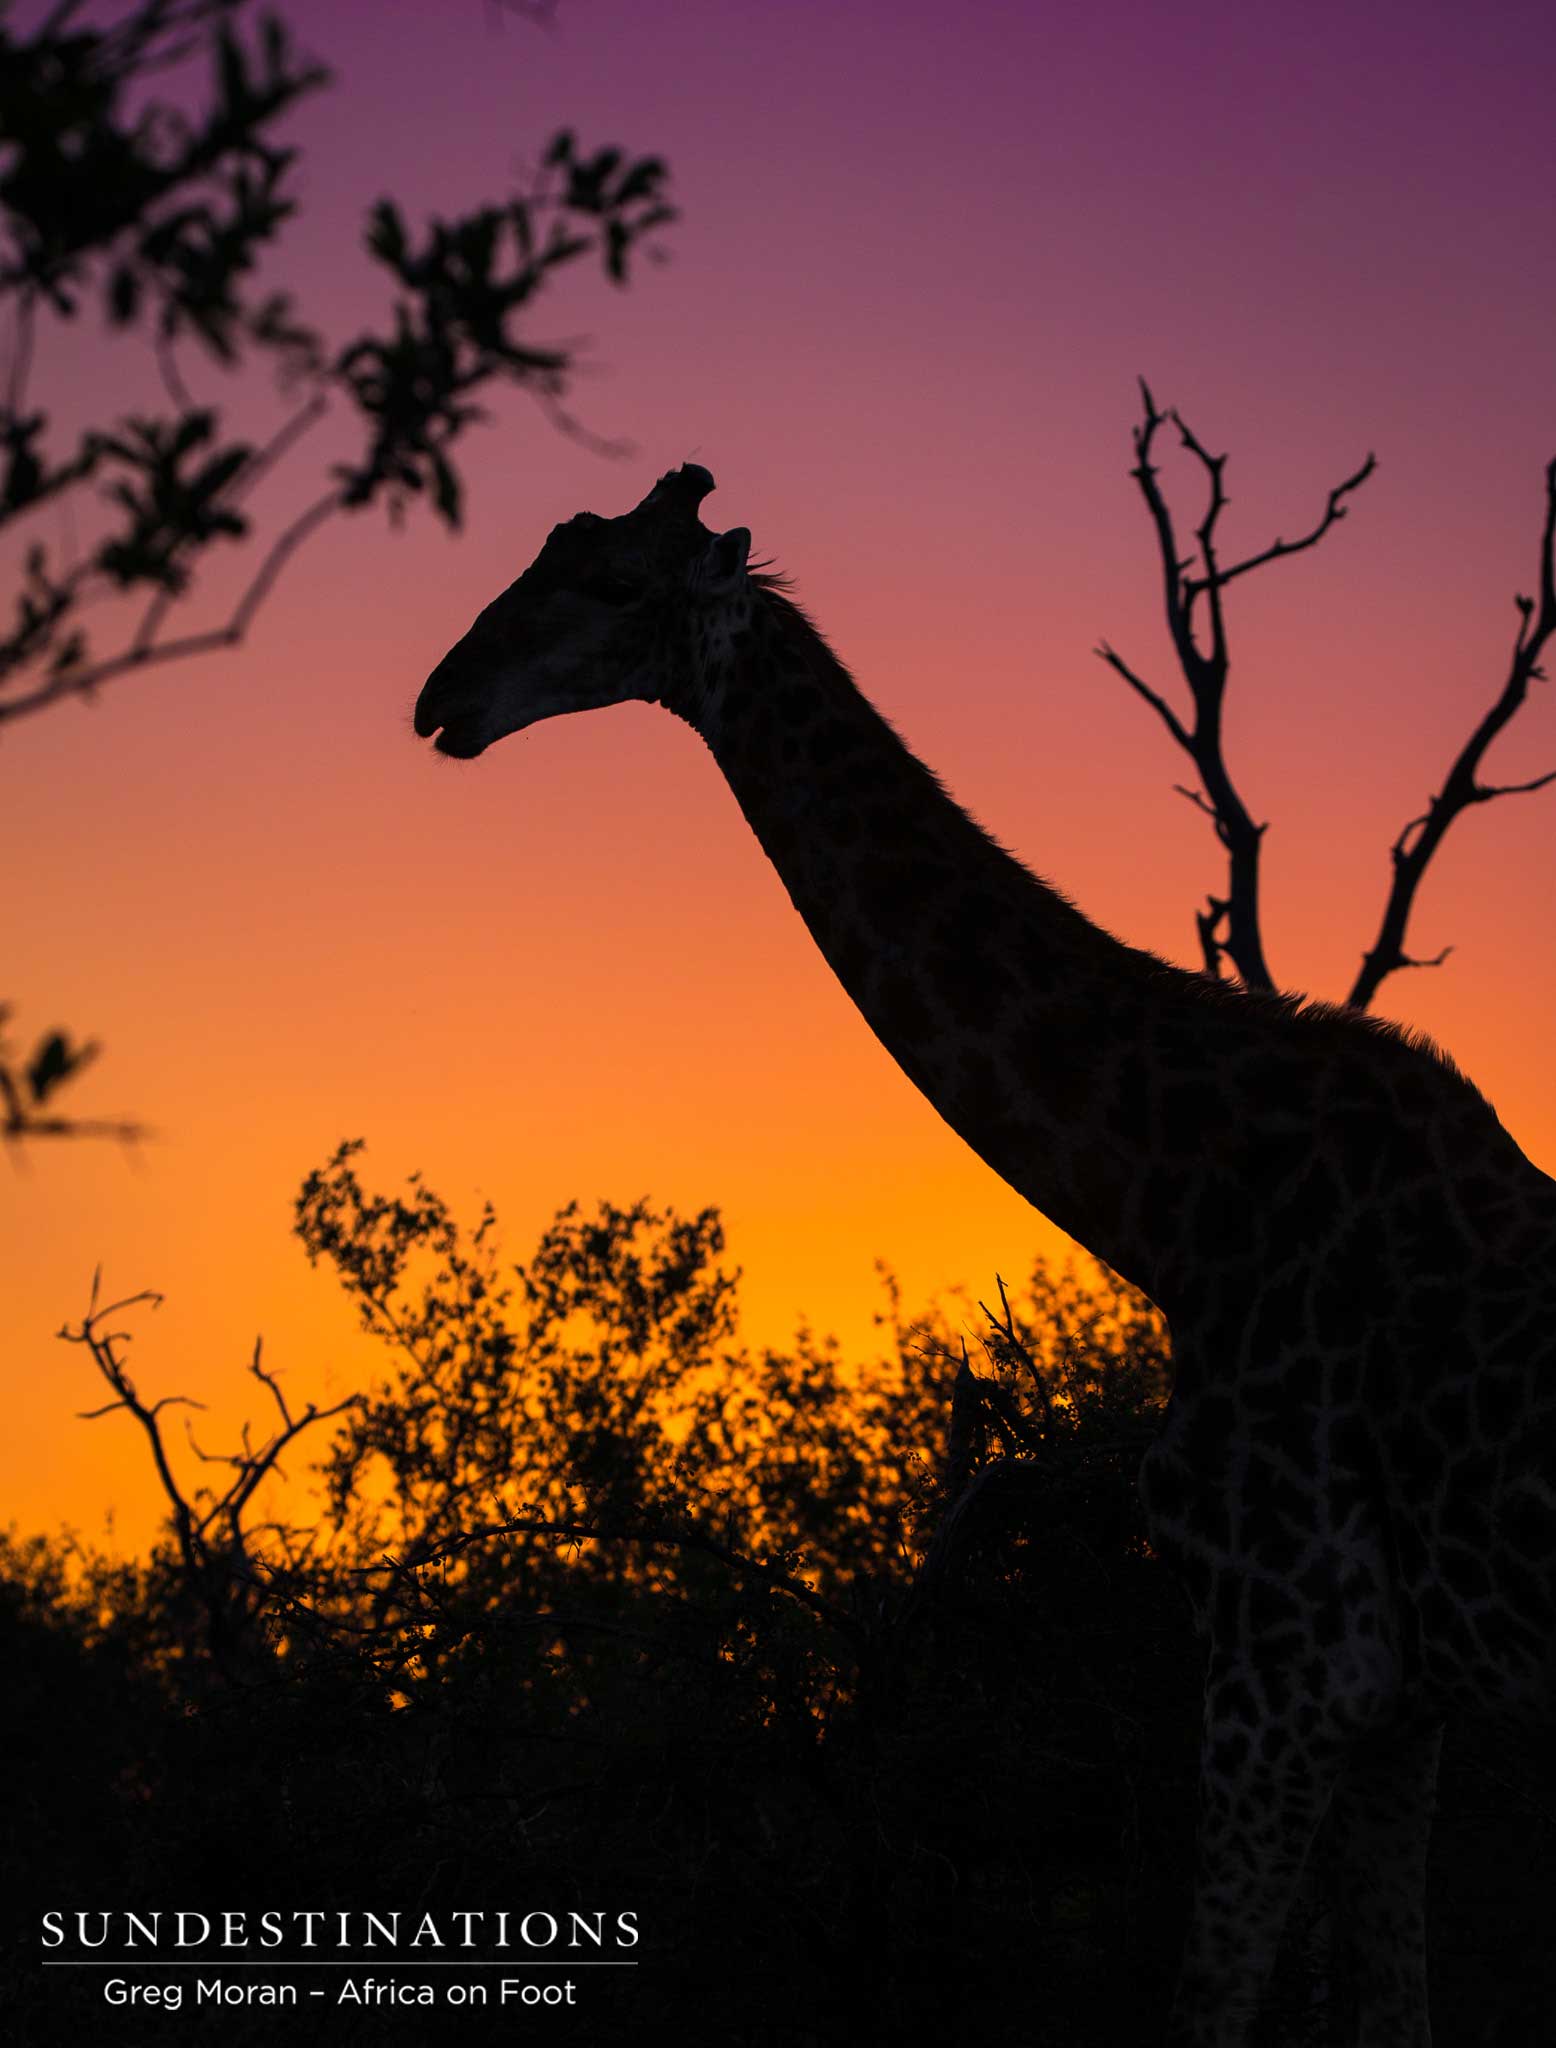 The world's tallest mammal gets the best view of the jewel-toned sunset